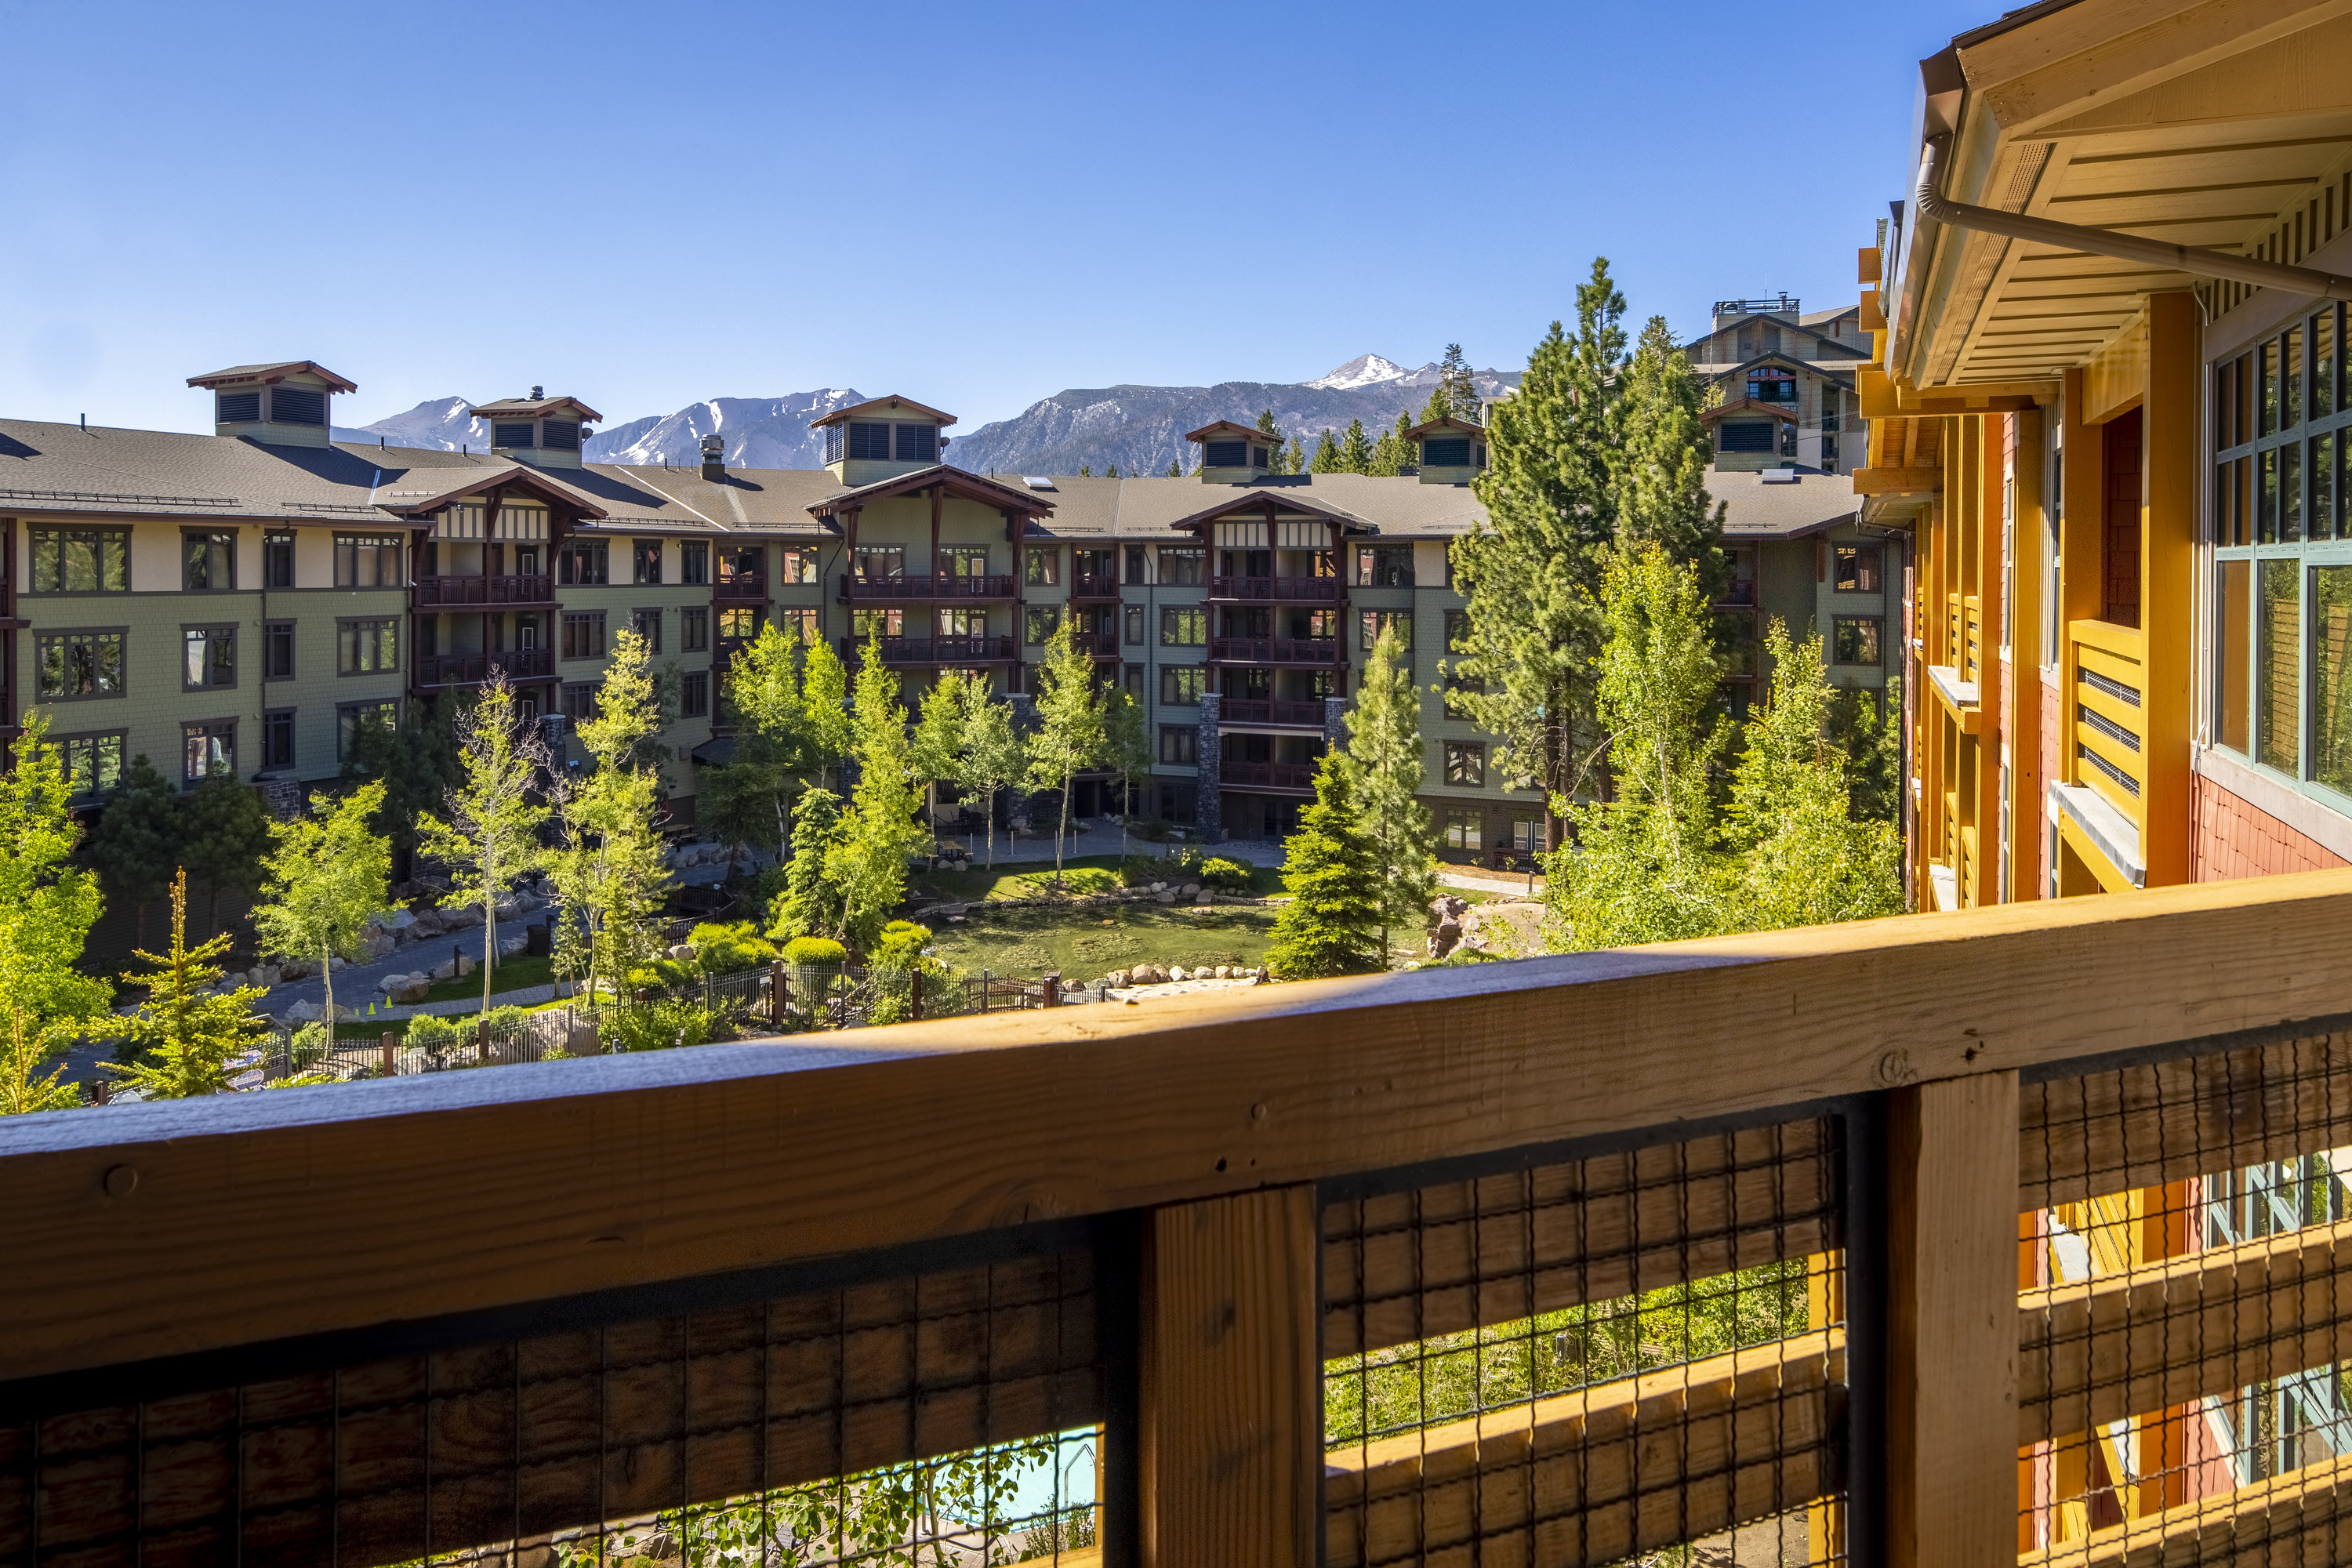 2 Bedroom balcony view of the Village at Mammoth (view varies)